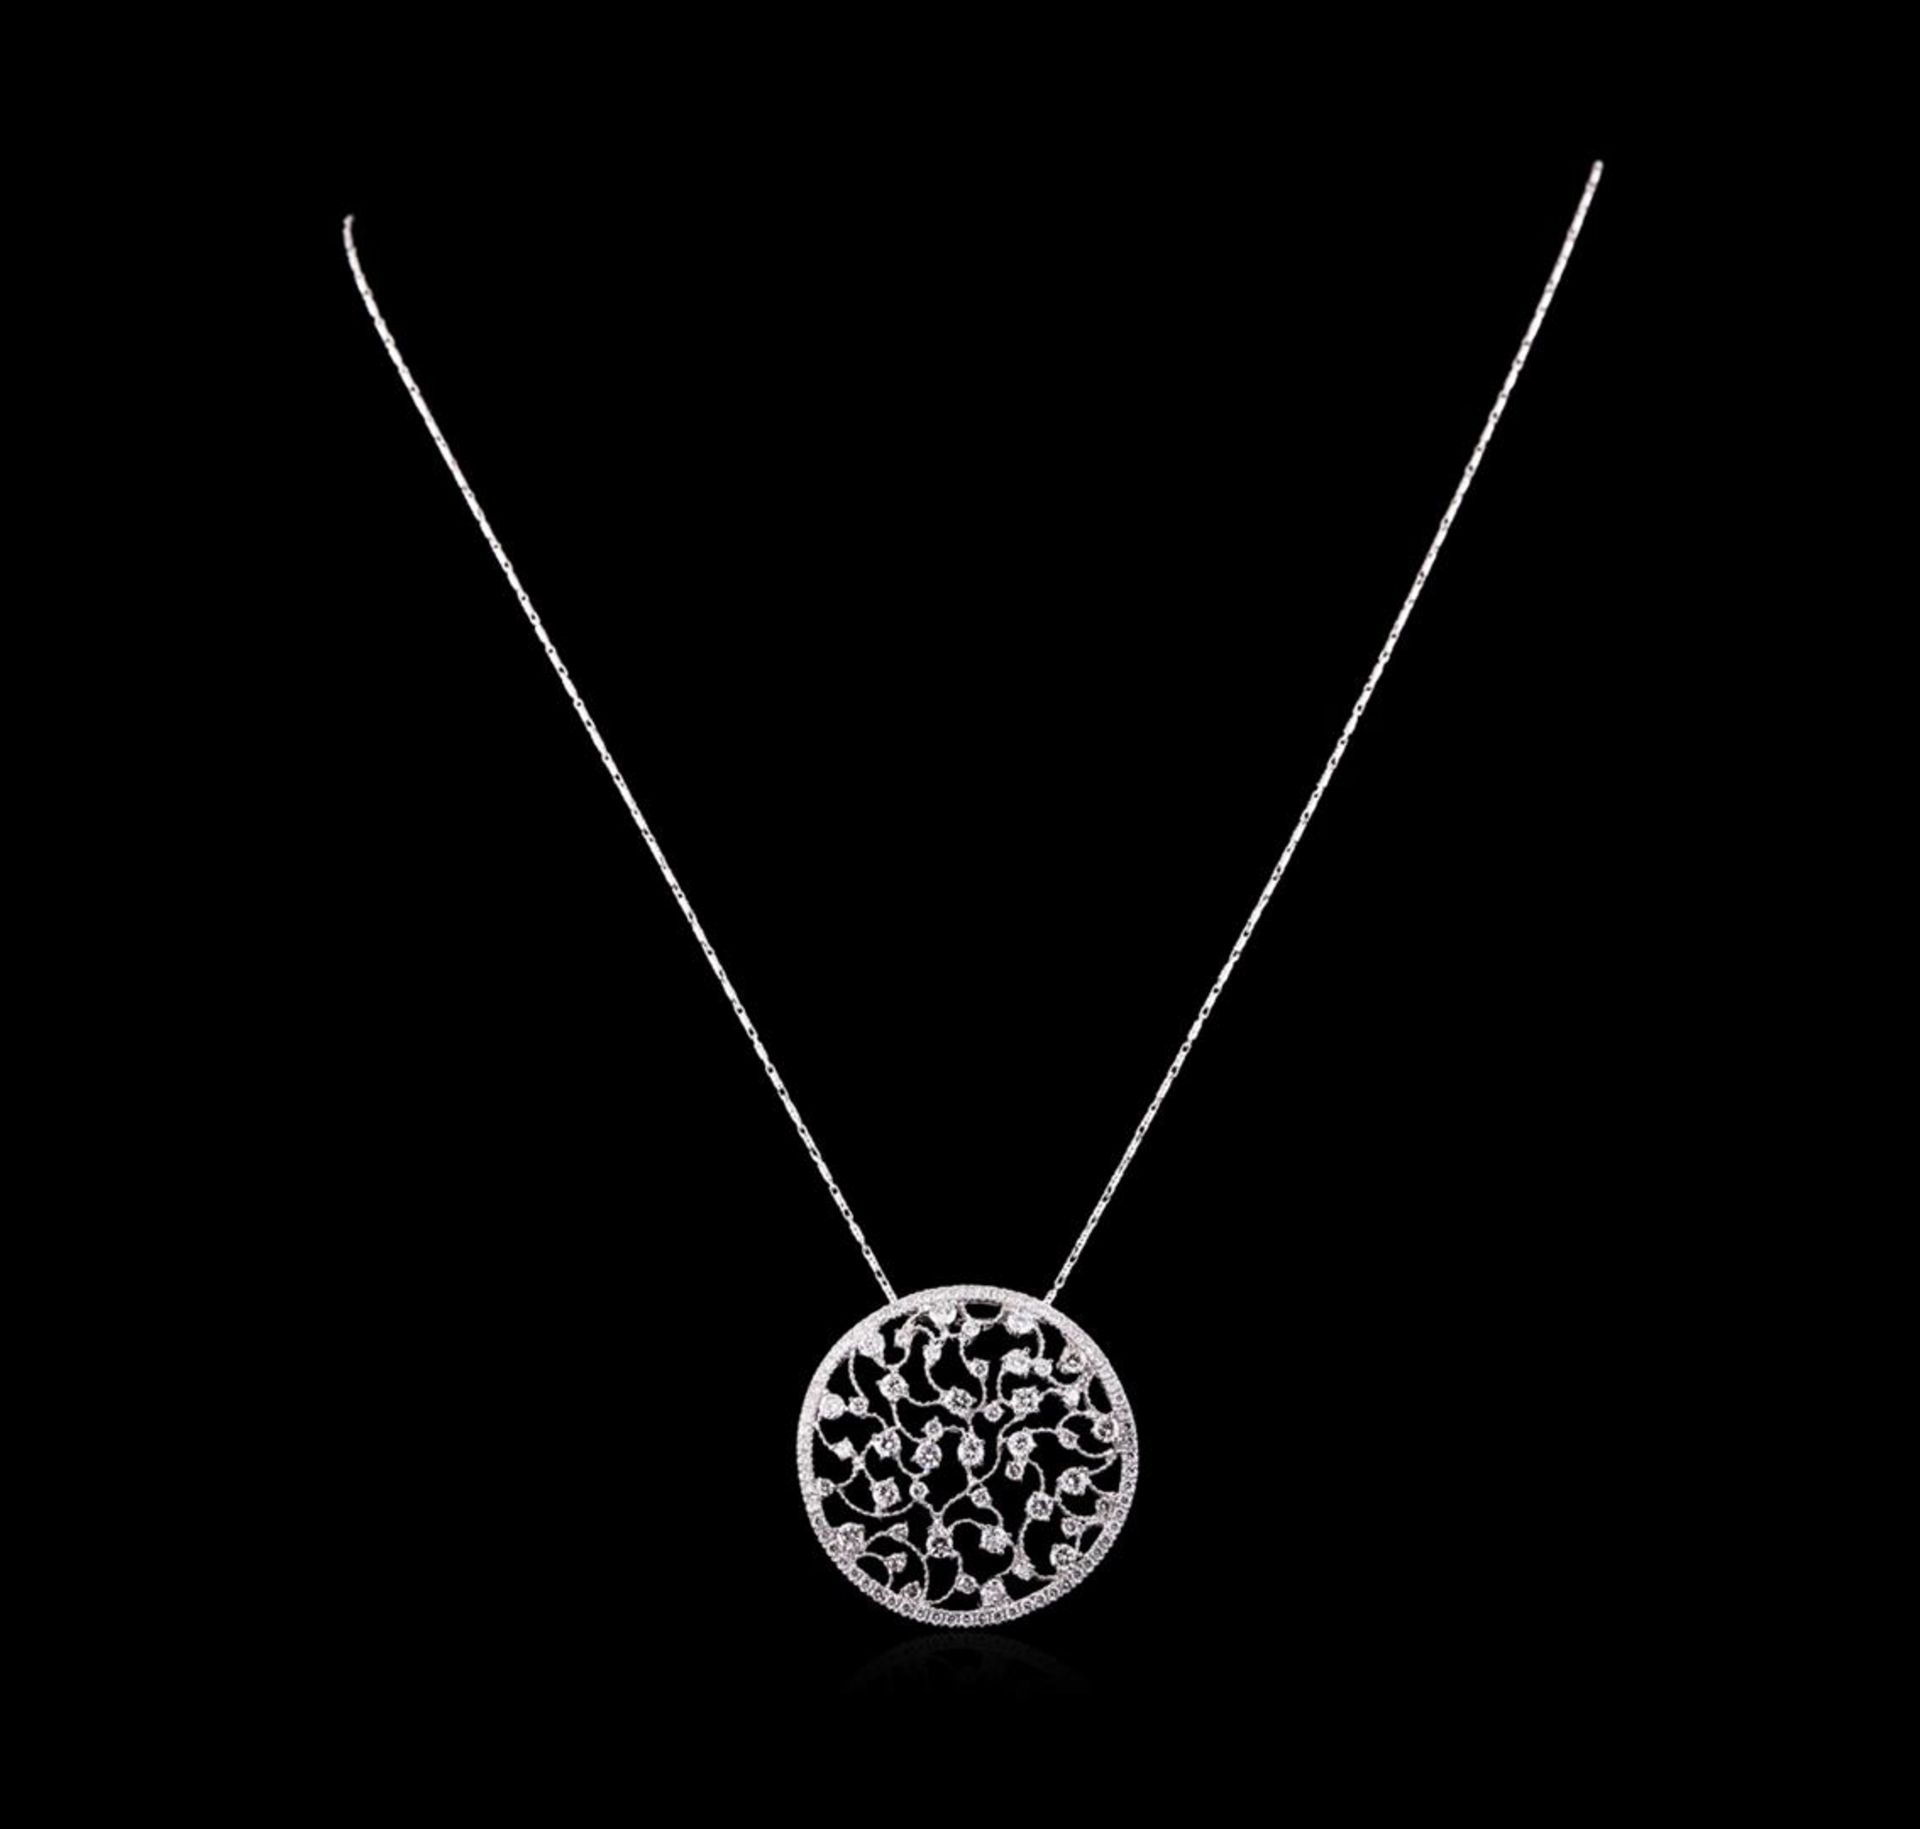 14KT White Gold 1.25 ctw Diamond Pendant With Chain - Image 2 of 4